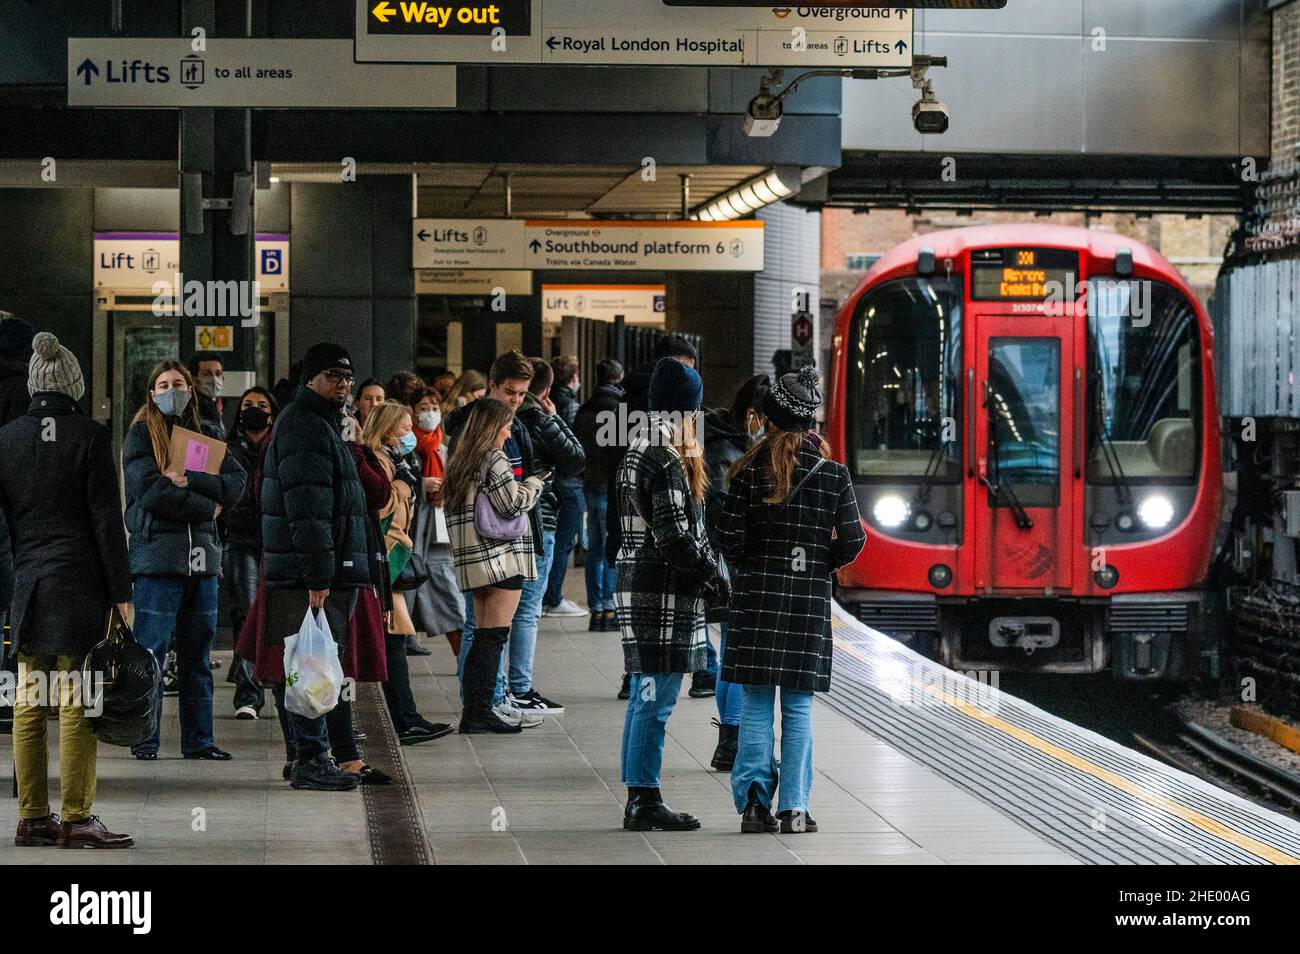 London, UK. 7th Jan, 2022. Most trains seem reasonably b usy (for a lunchtime), depite the latest stay at home advice - Masks are again compulsory on public transport, due to the Omicron variant, and there is an increase in compliance but plenty continue to ignore the rule. Credit: Guy Bell/Alamy Live News Stock Photo